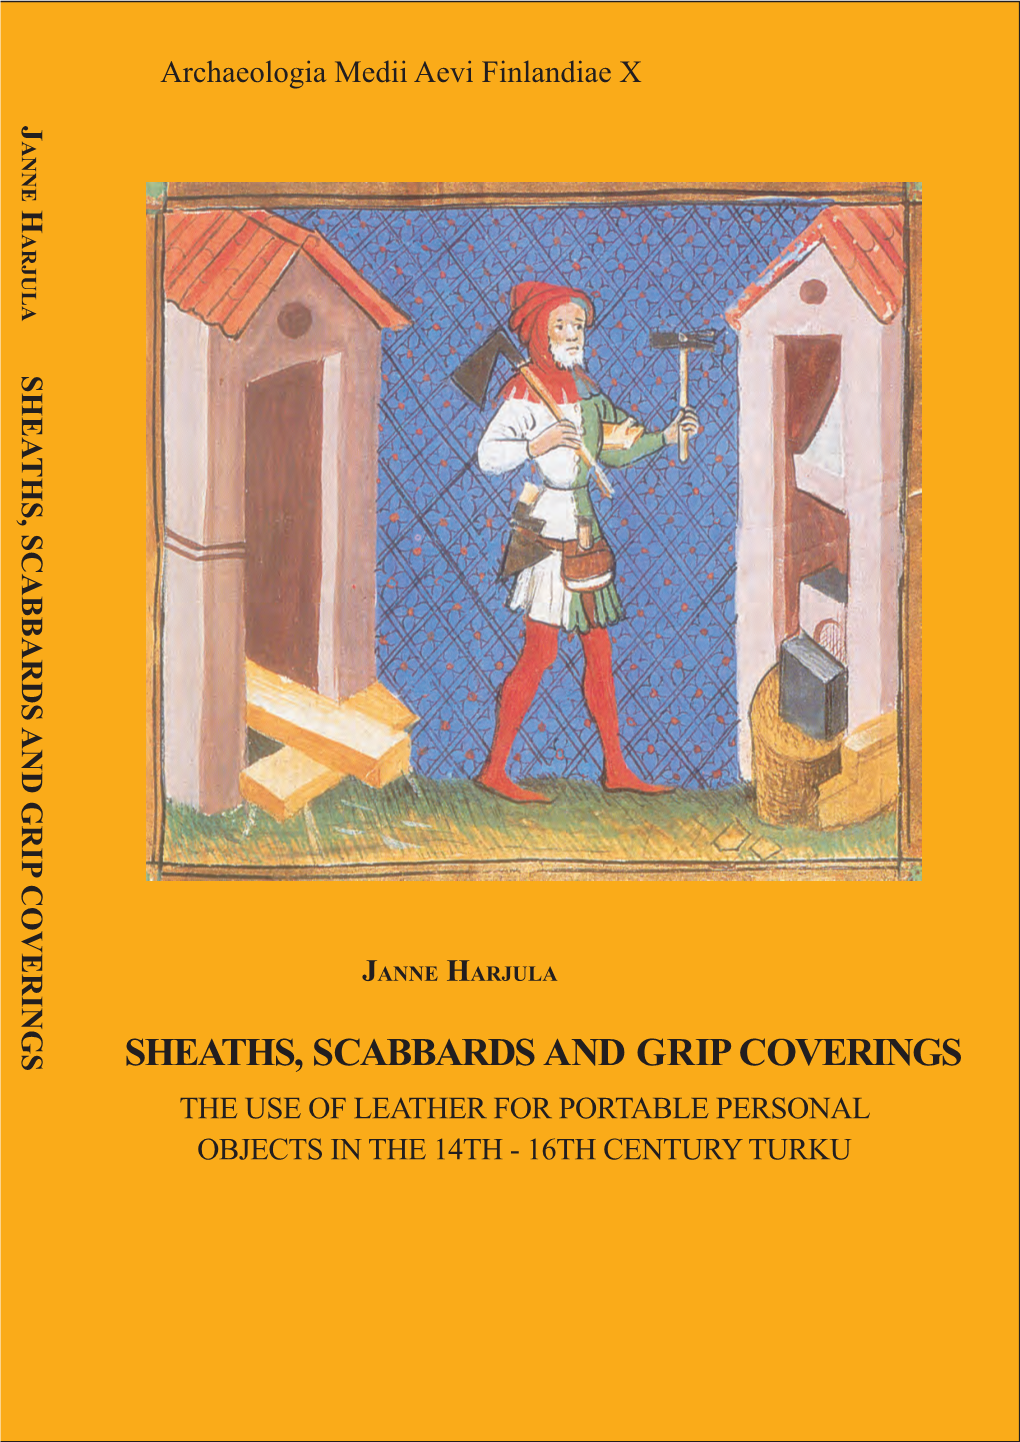 Sheaths, Scabbards and Grip Coverings